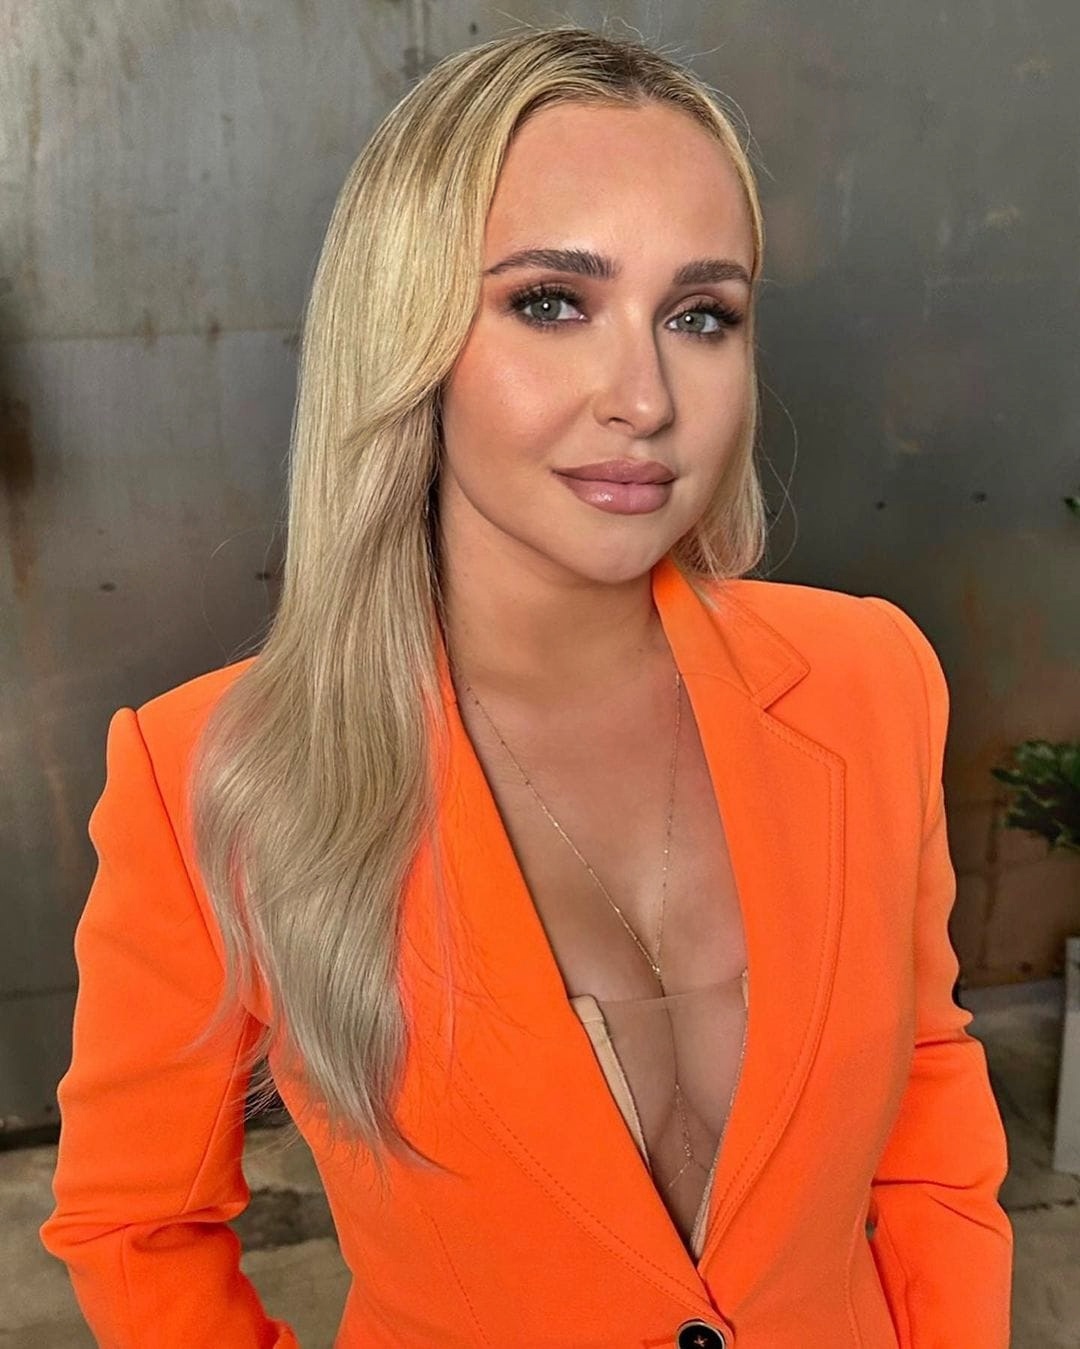 Orange You Glad to See Hayden Panettiere in The New SCREAM Trailer! - Photo 1